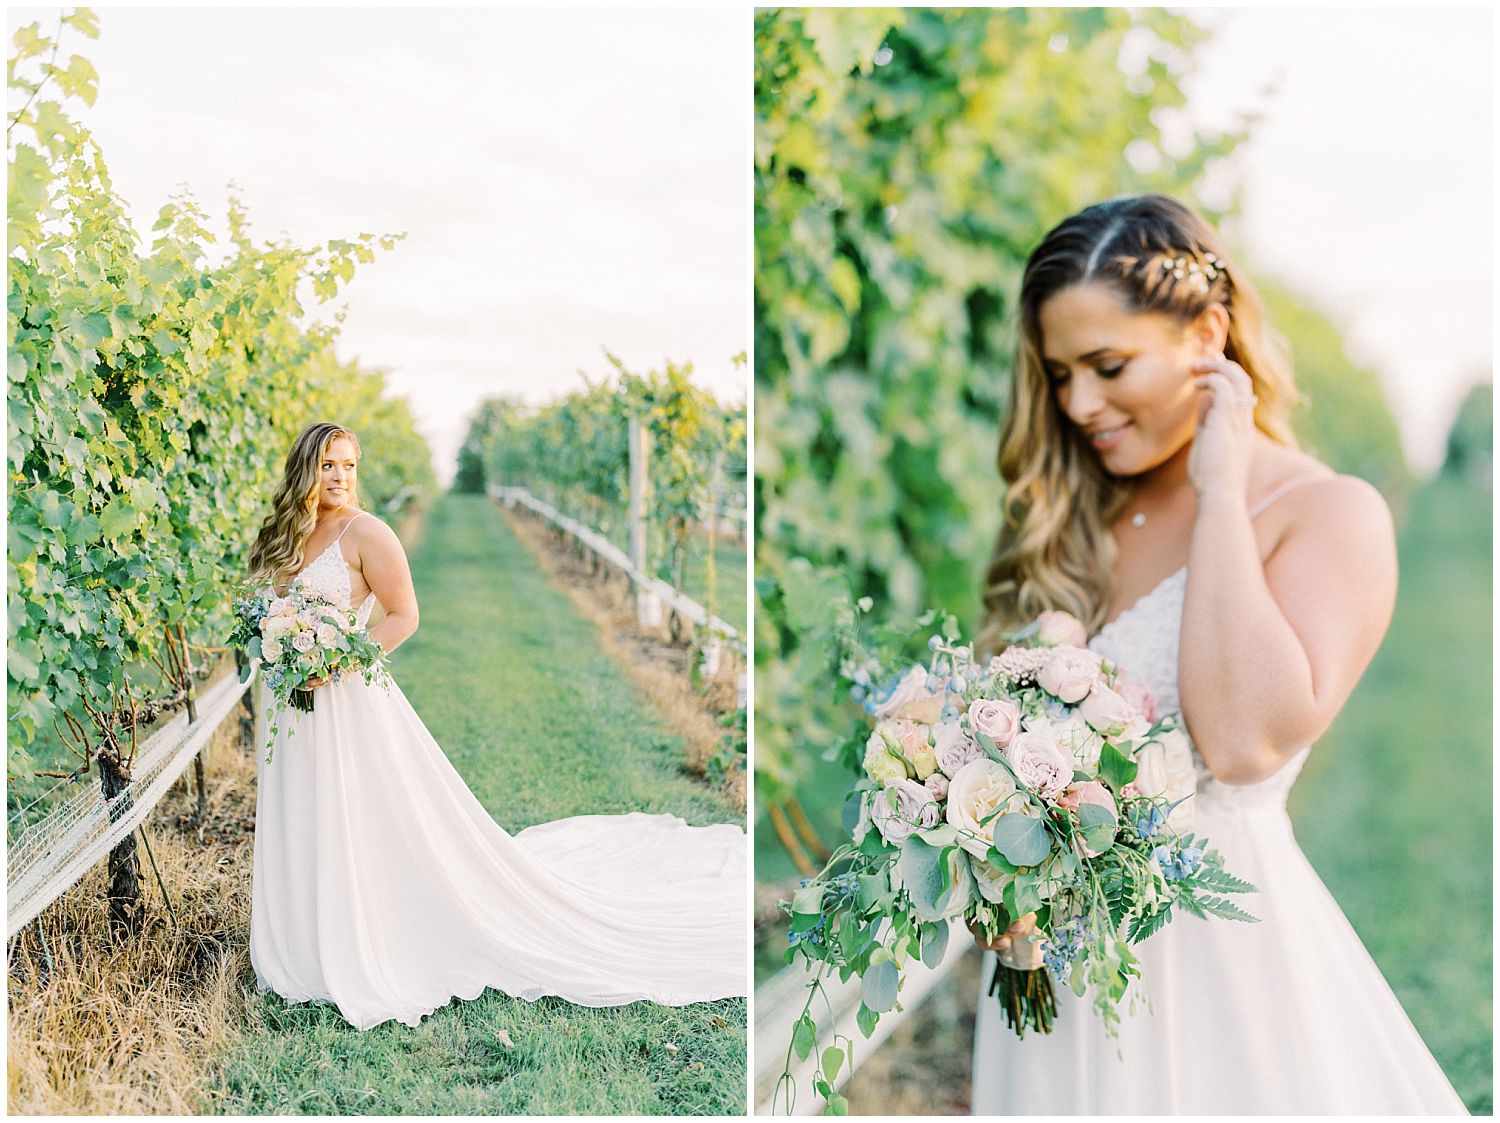 Wedding photography in vineyards at 8 Chains North Winery